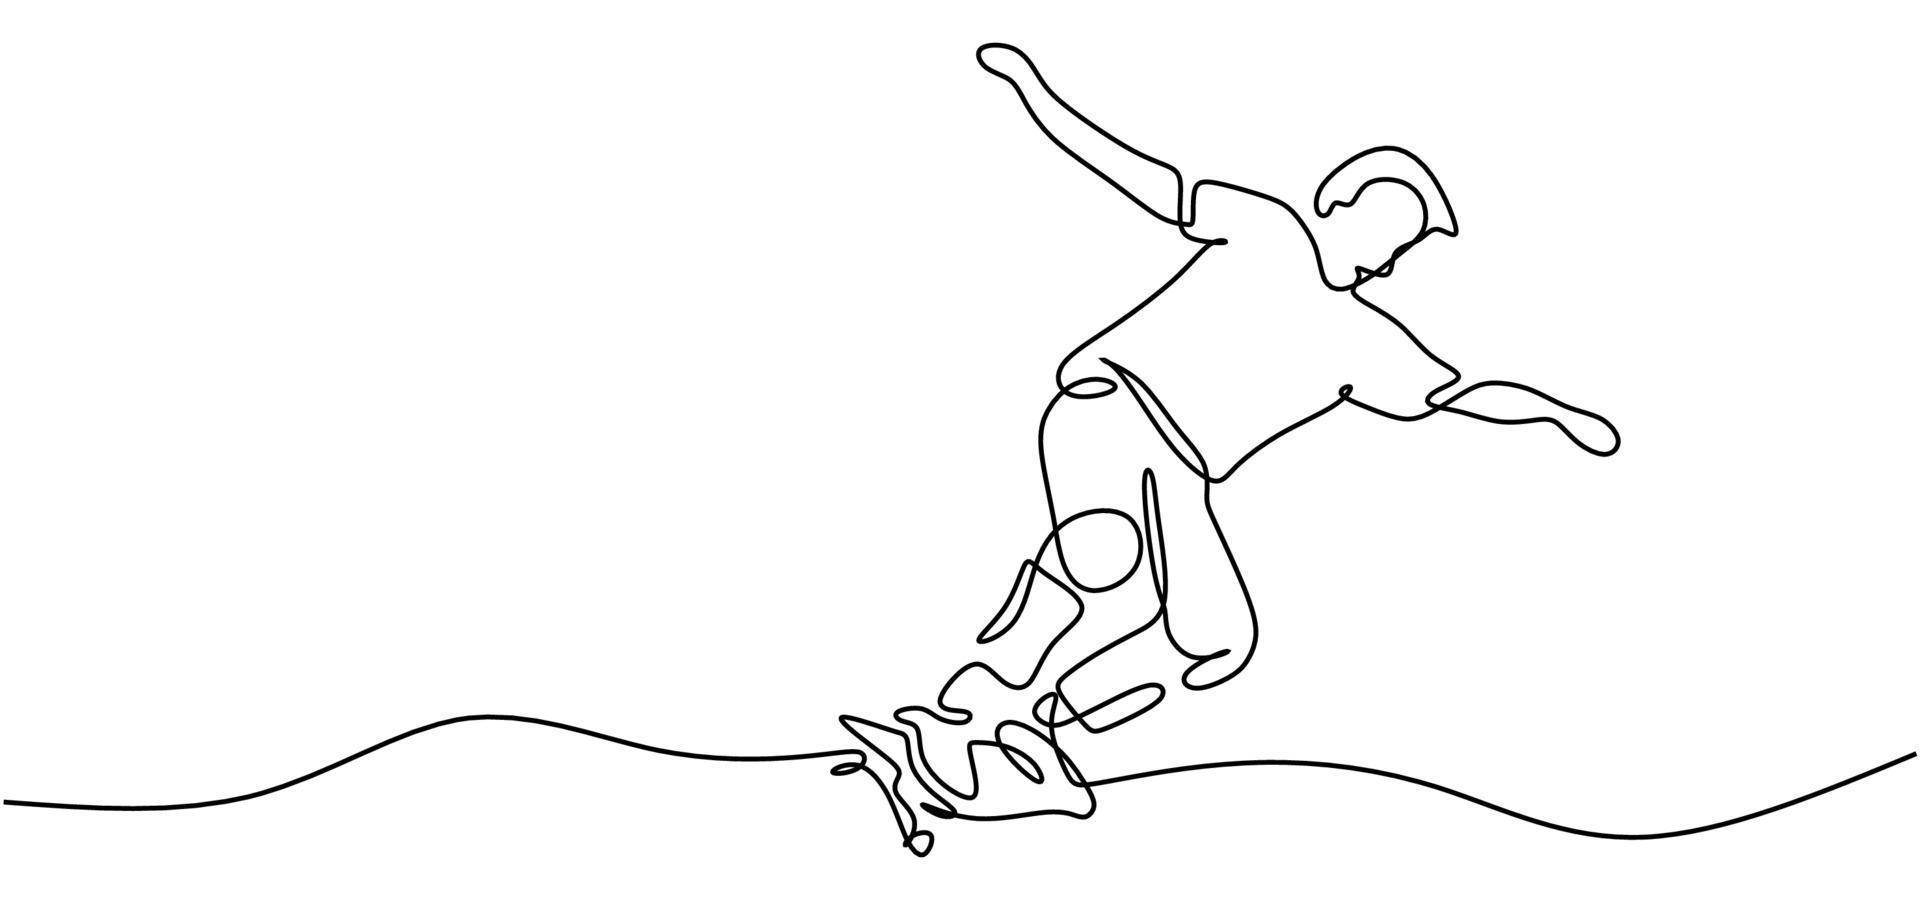 people play skateboard one line drawing vector